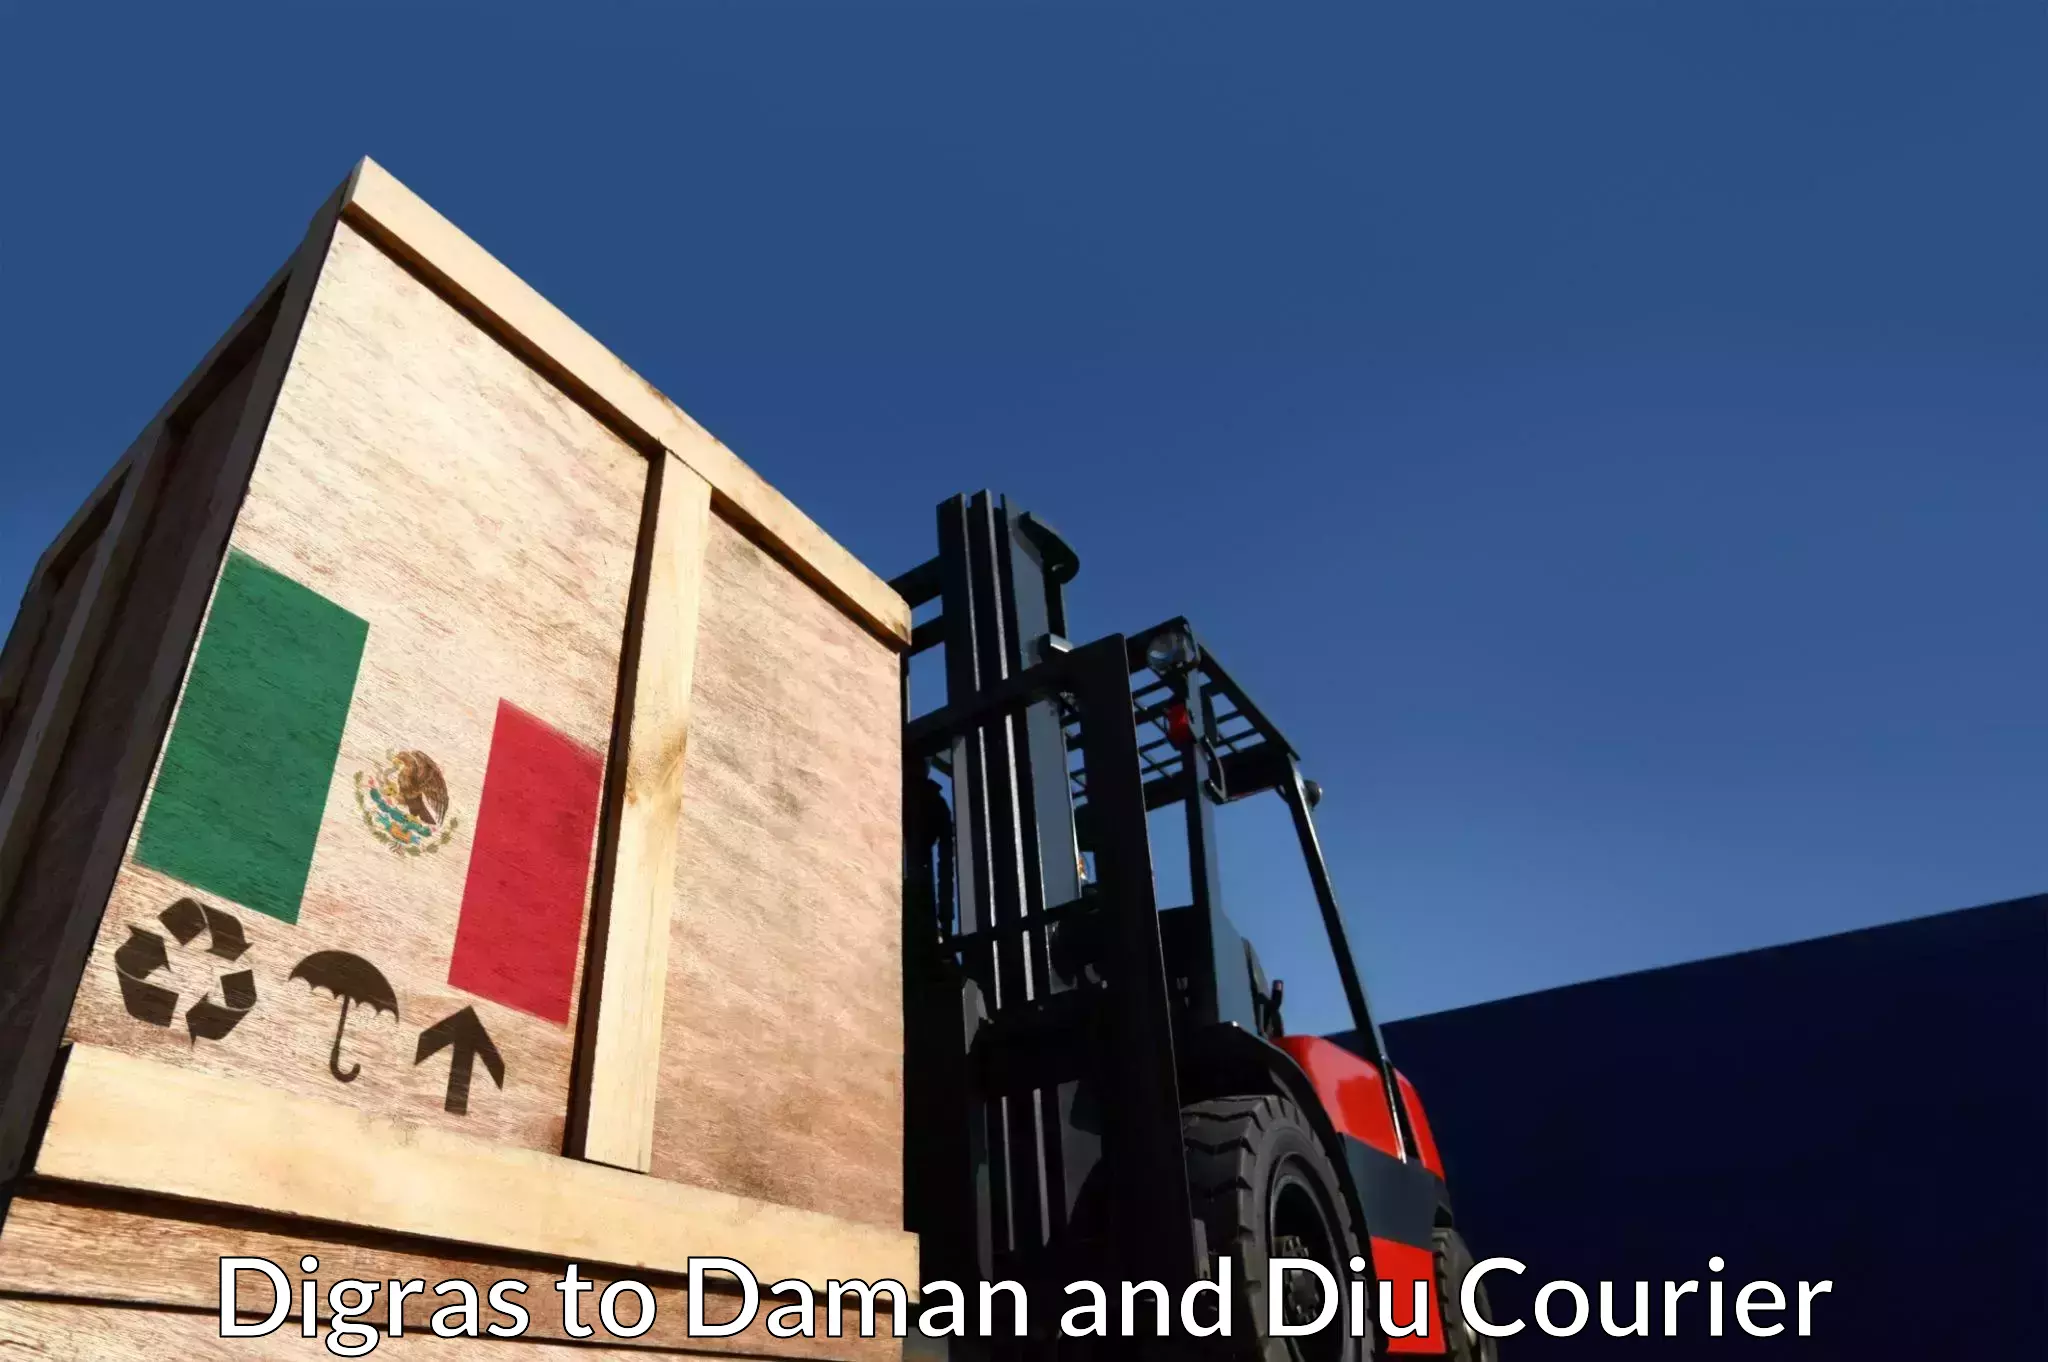 State-of-the-art courier technology Digras to Daman and Diu